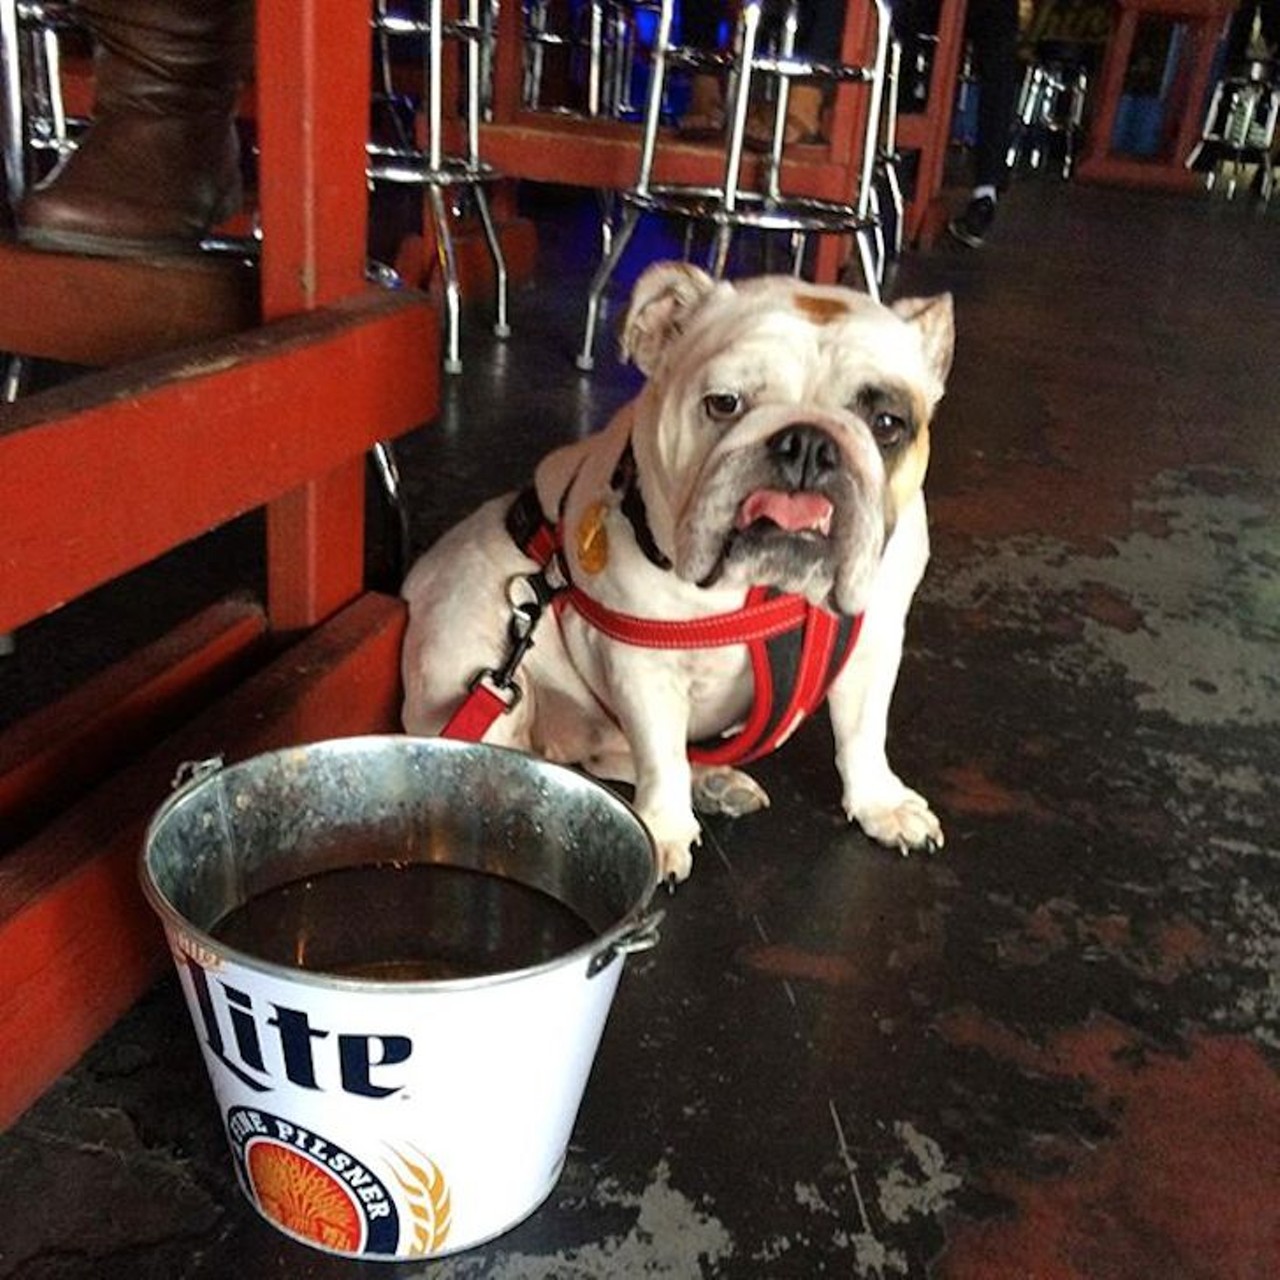 The Hangar 
8203 Broadway, (210) 824-2700, thehangarsa.com
Enjoy a cold beer while hanging out with your loyal friend at the Hangar's dog park. 
Photo via Instagram (see_a_penny_bulldog)